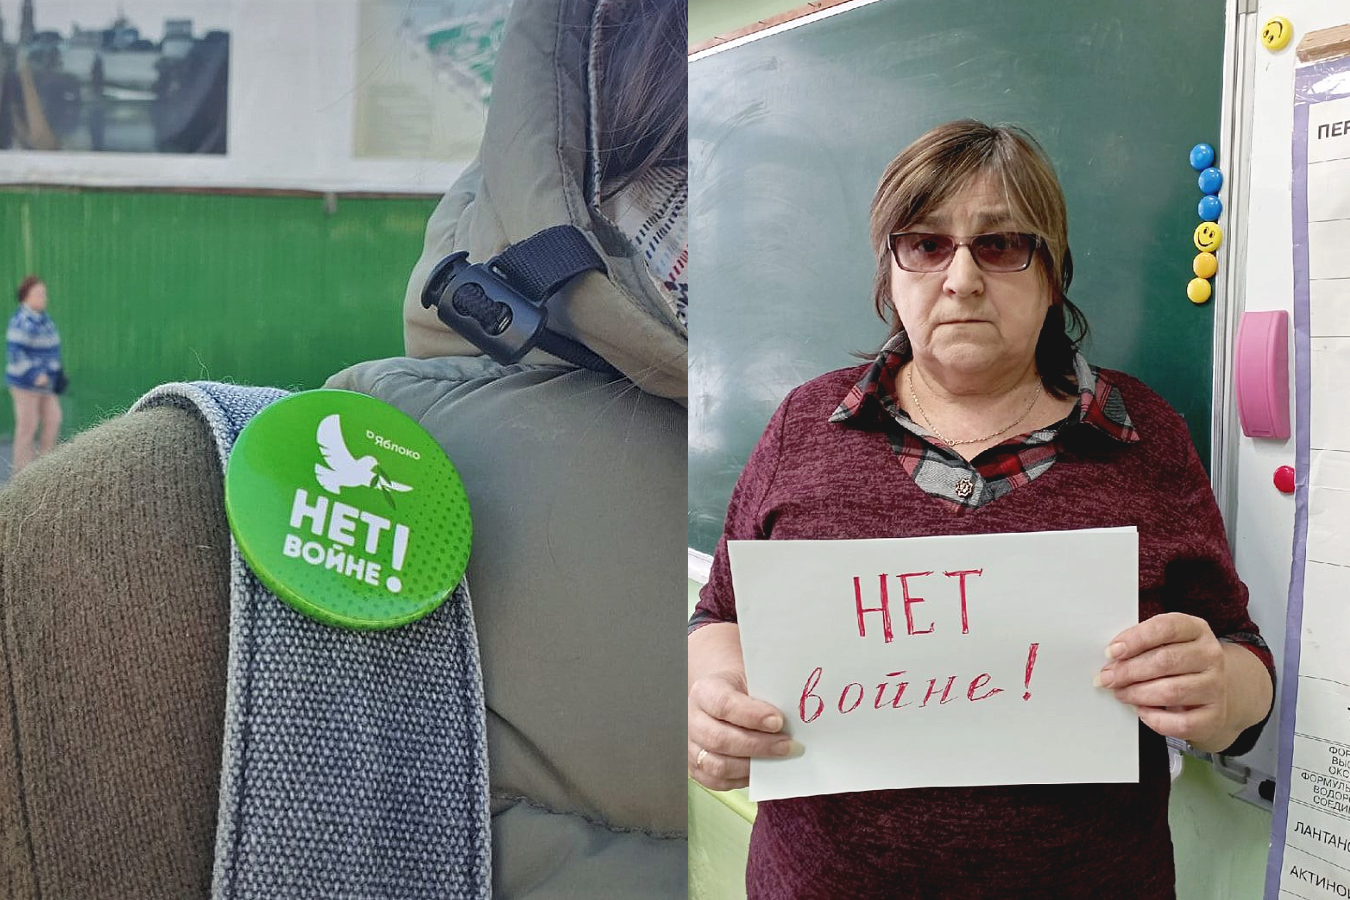 Polina Barinova, detained because of her «No to War» pin and a teacher Lyubov Zhiltsova, fined for posting a photo with a «No to War» poster / Photo provided by the detainee and the teacher’s social media accounts